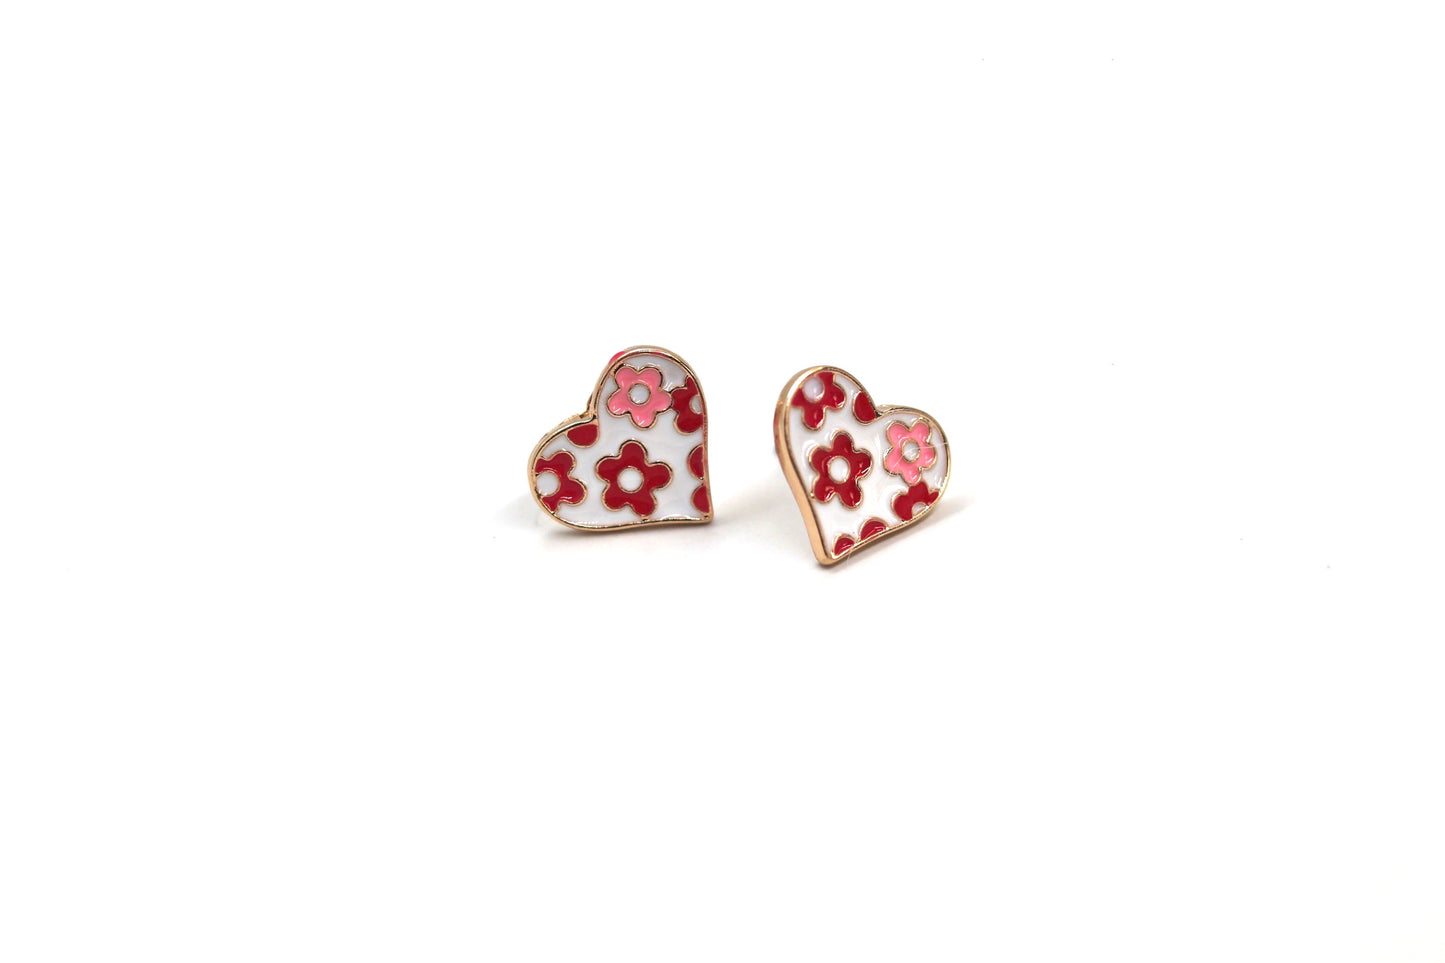 "You Had Me At Hello" Pink Heart Earrings